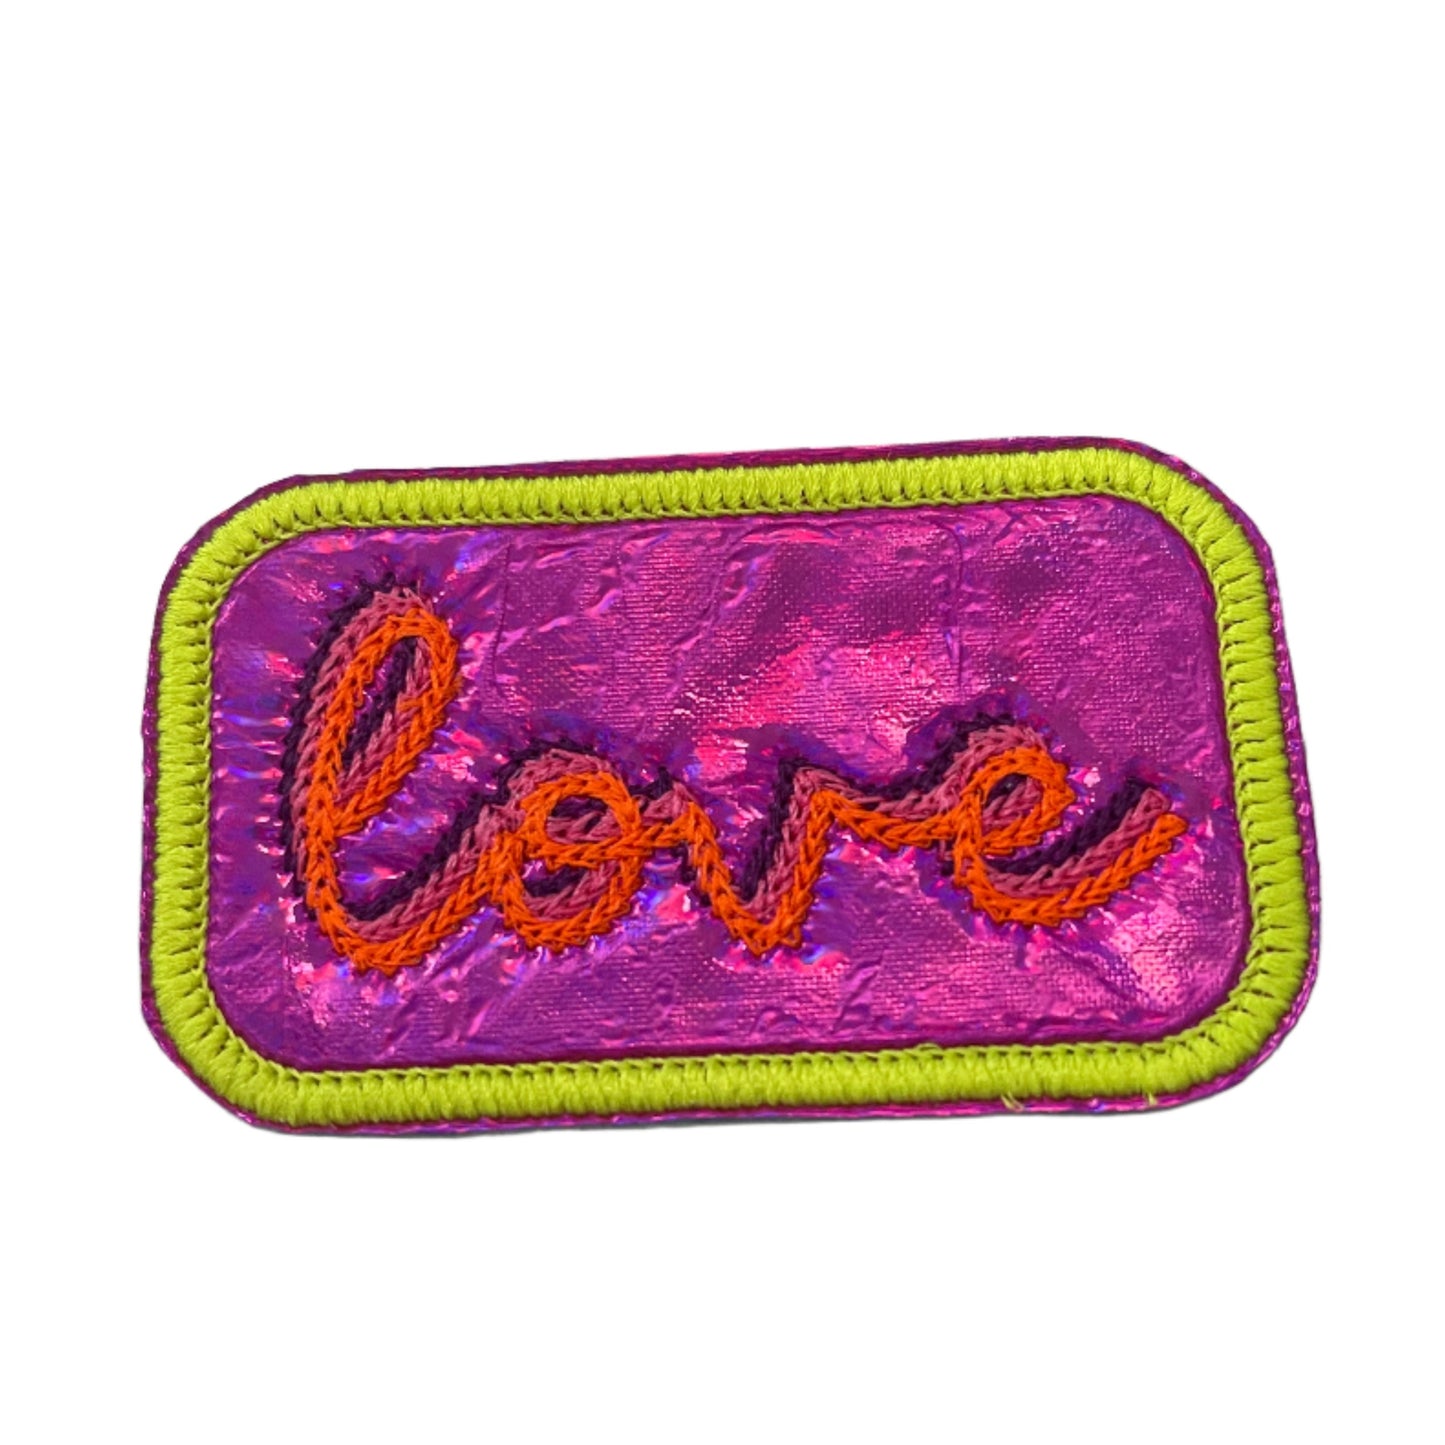 Neon "Love" Iron-On Patch - Bright and Bold Retro Style